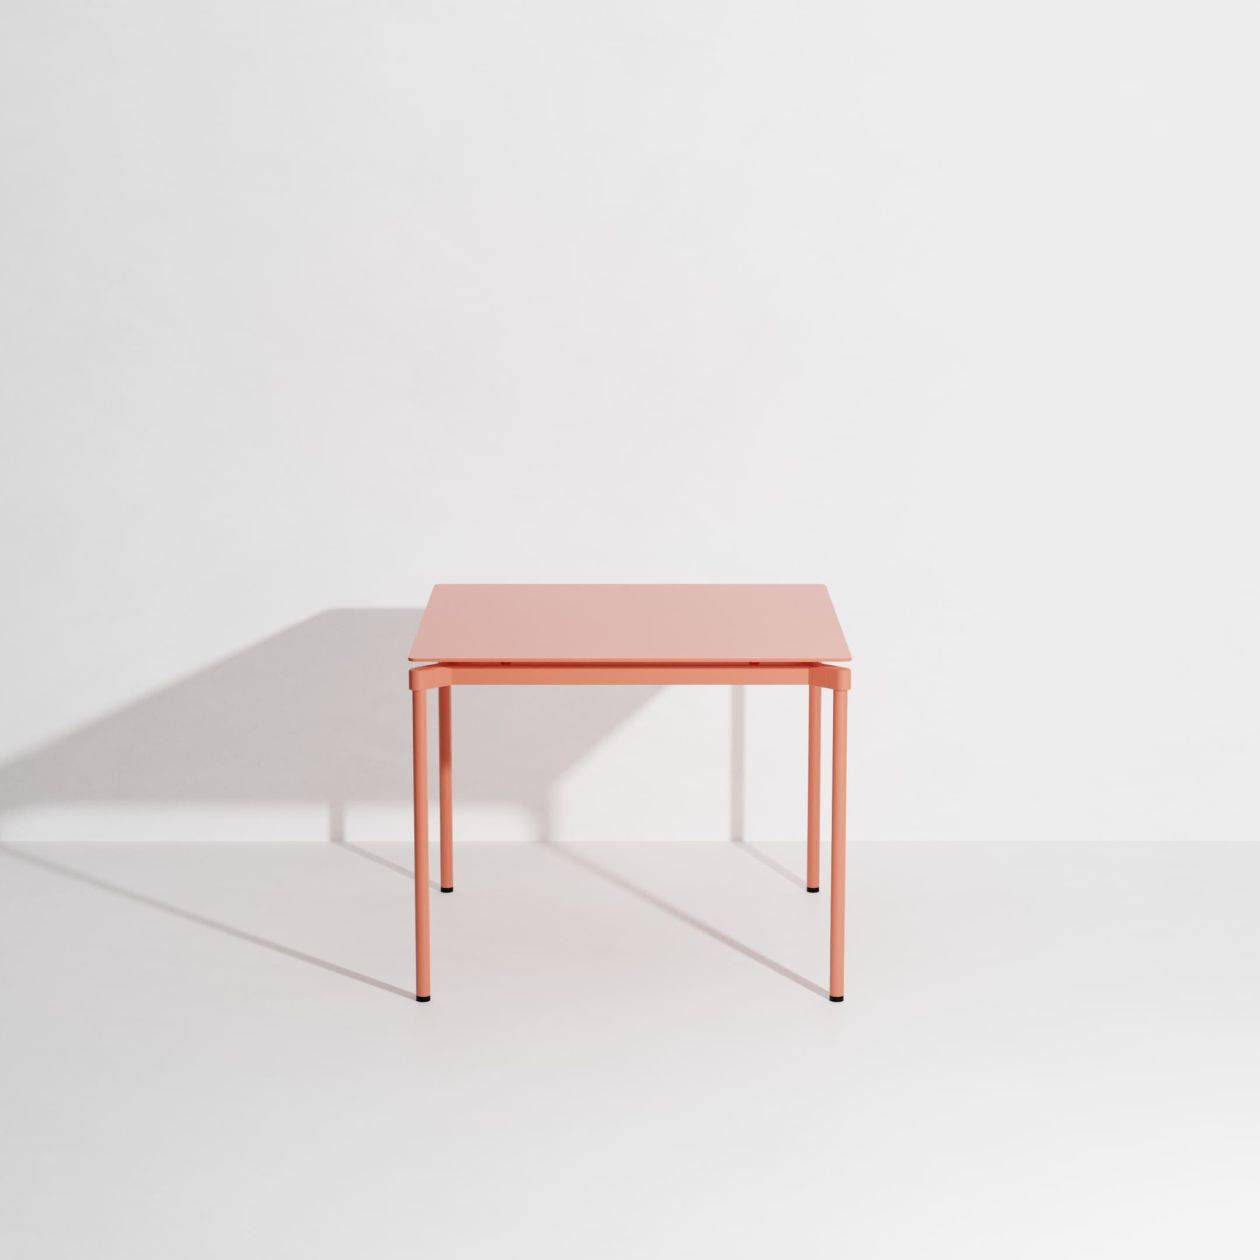 Fromme Square Table - Coral